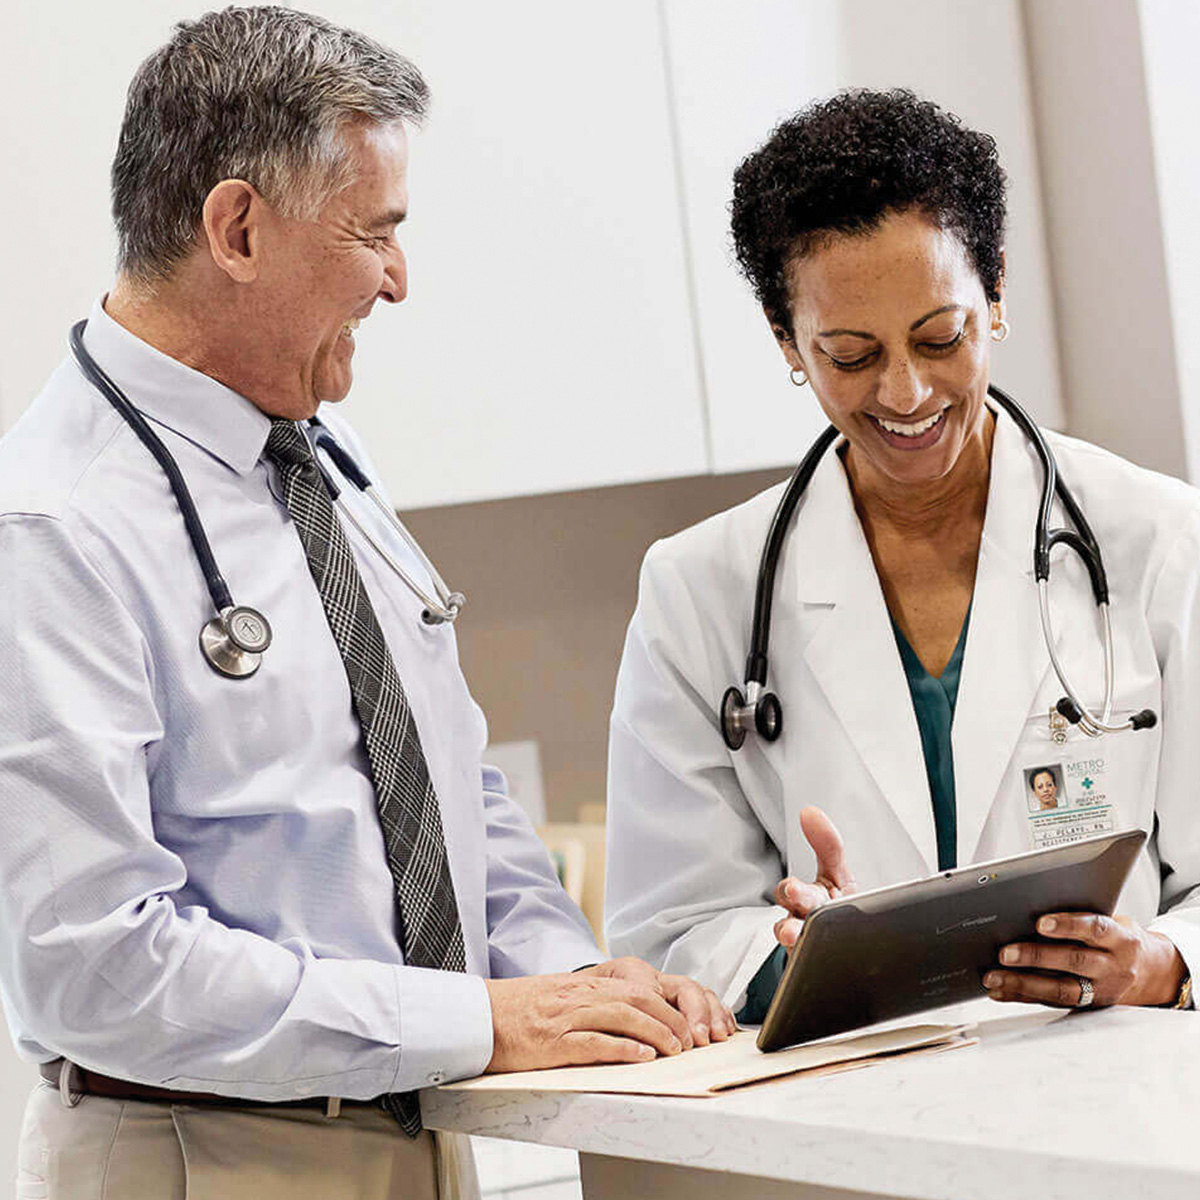 Two doctors smile as they discuss information on a tablet.